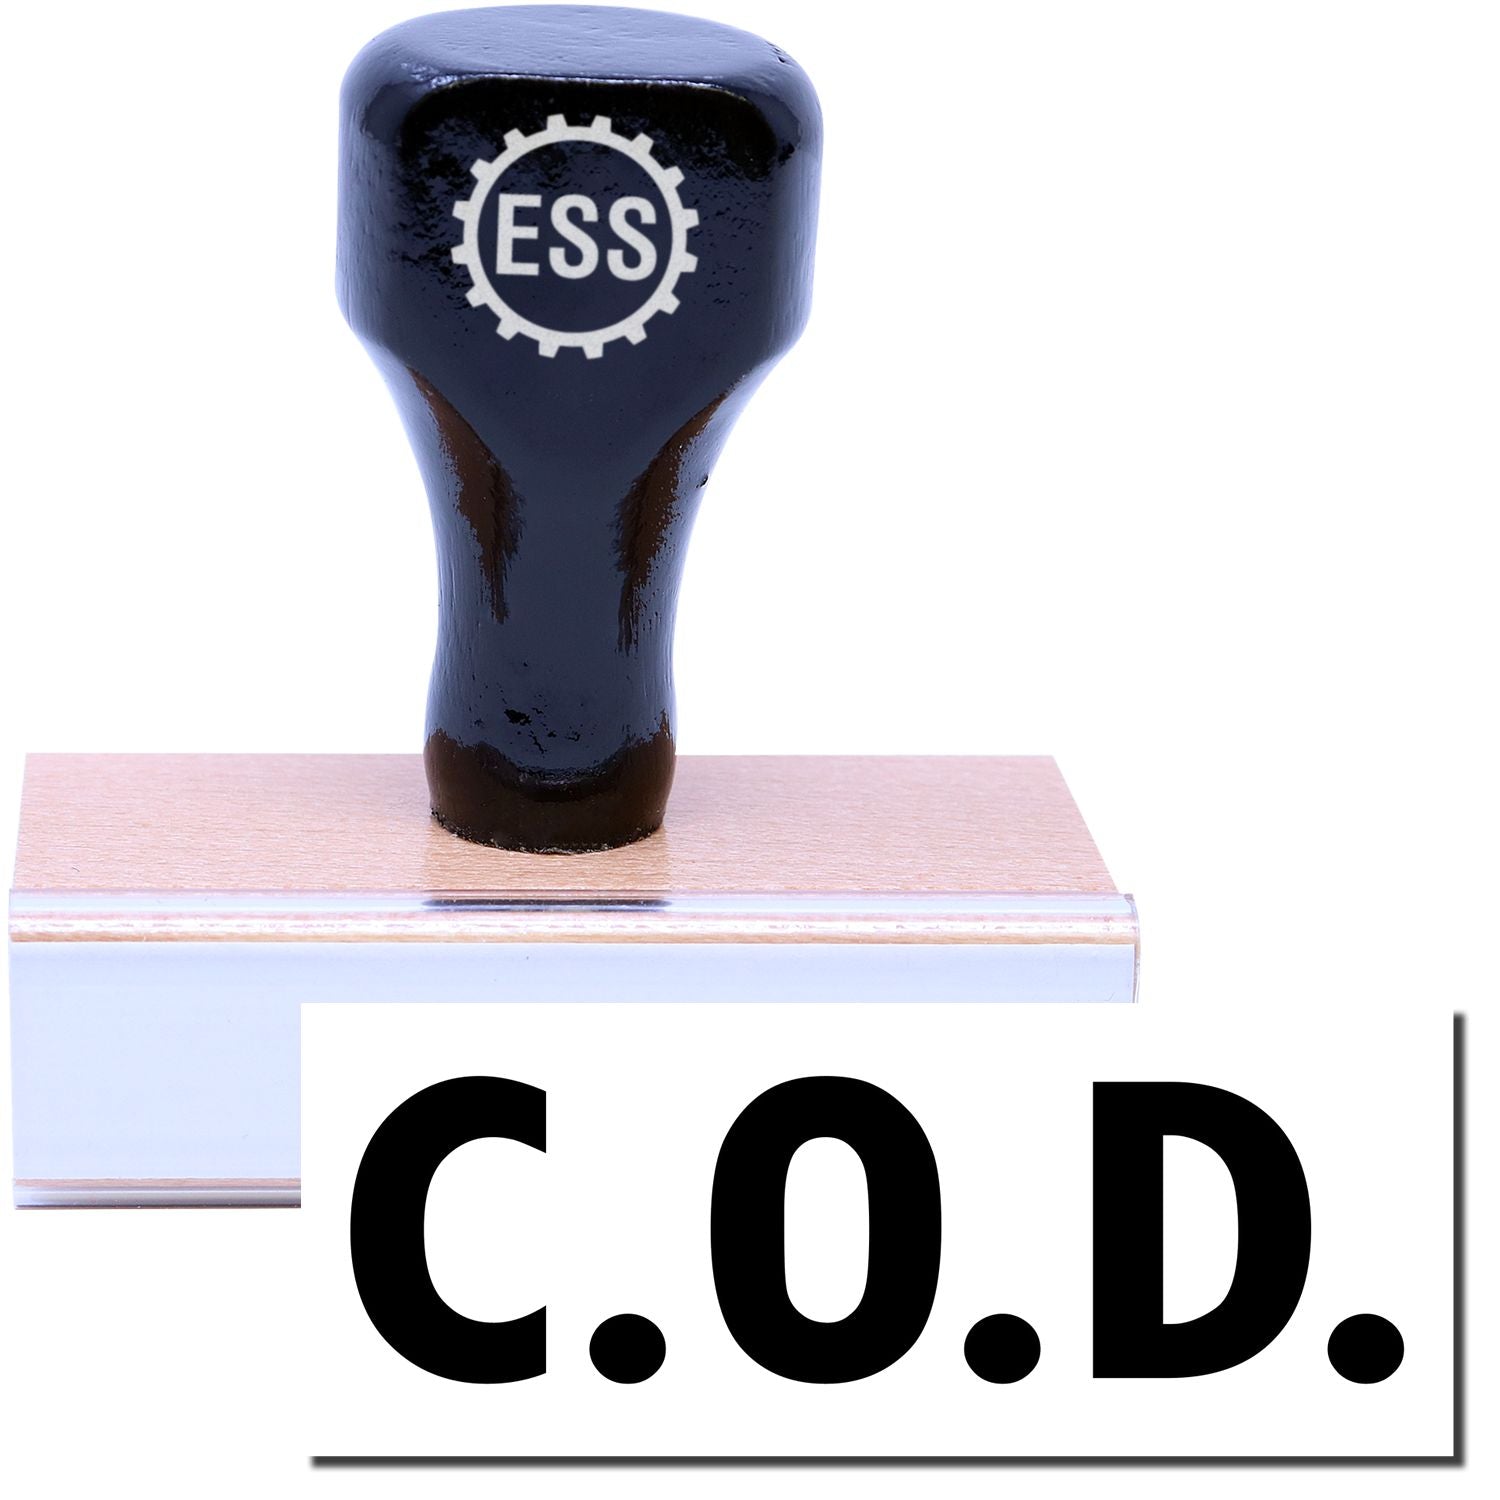 A stock office rubber stamp with a stamped image showing how the text "C.O.D." is displayed after stamping.